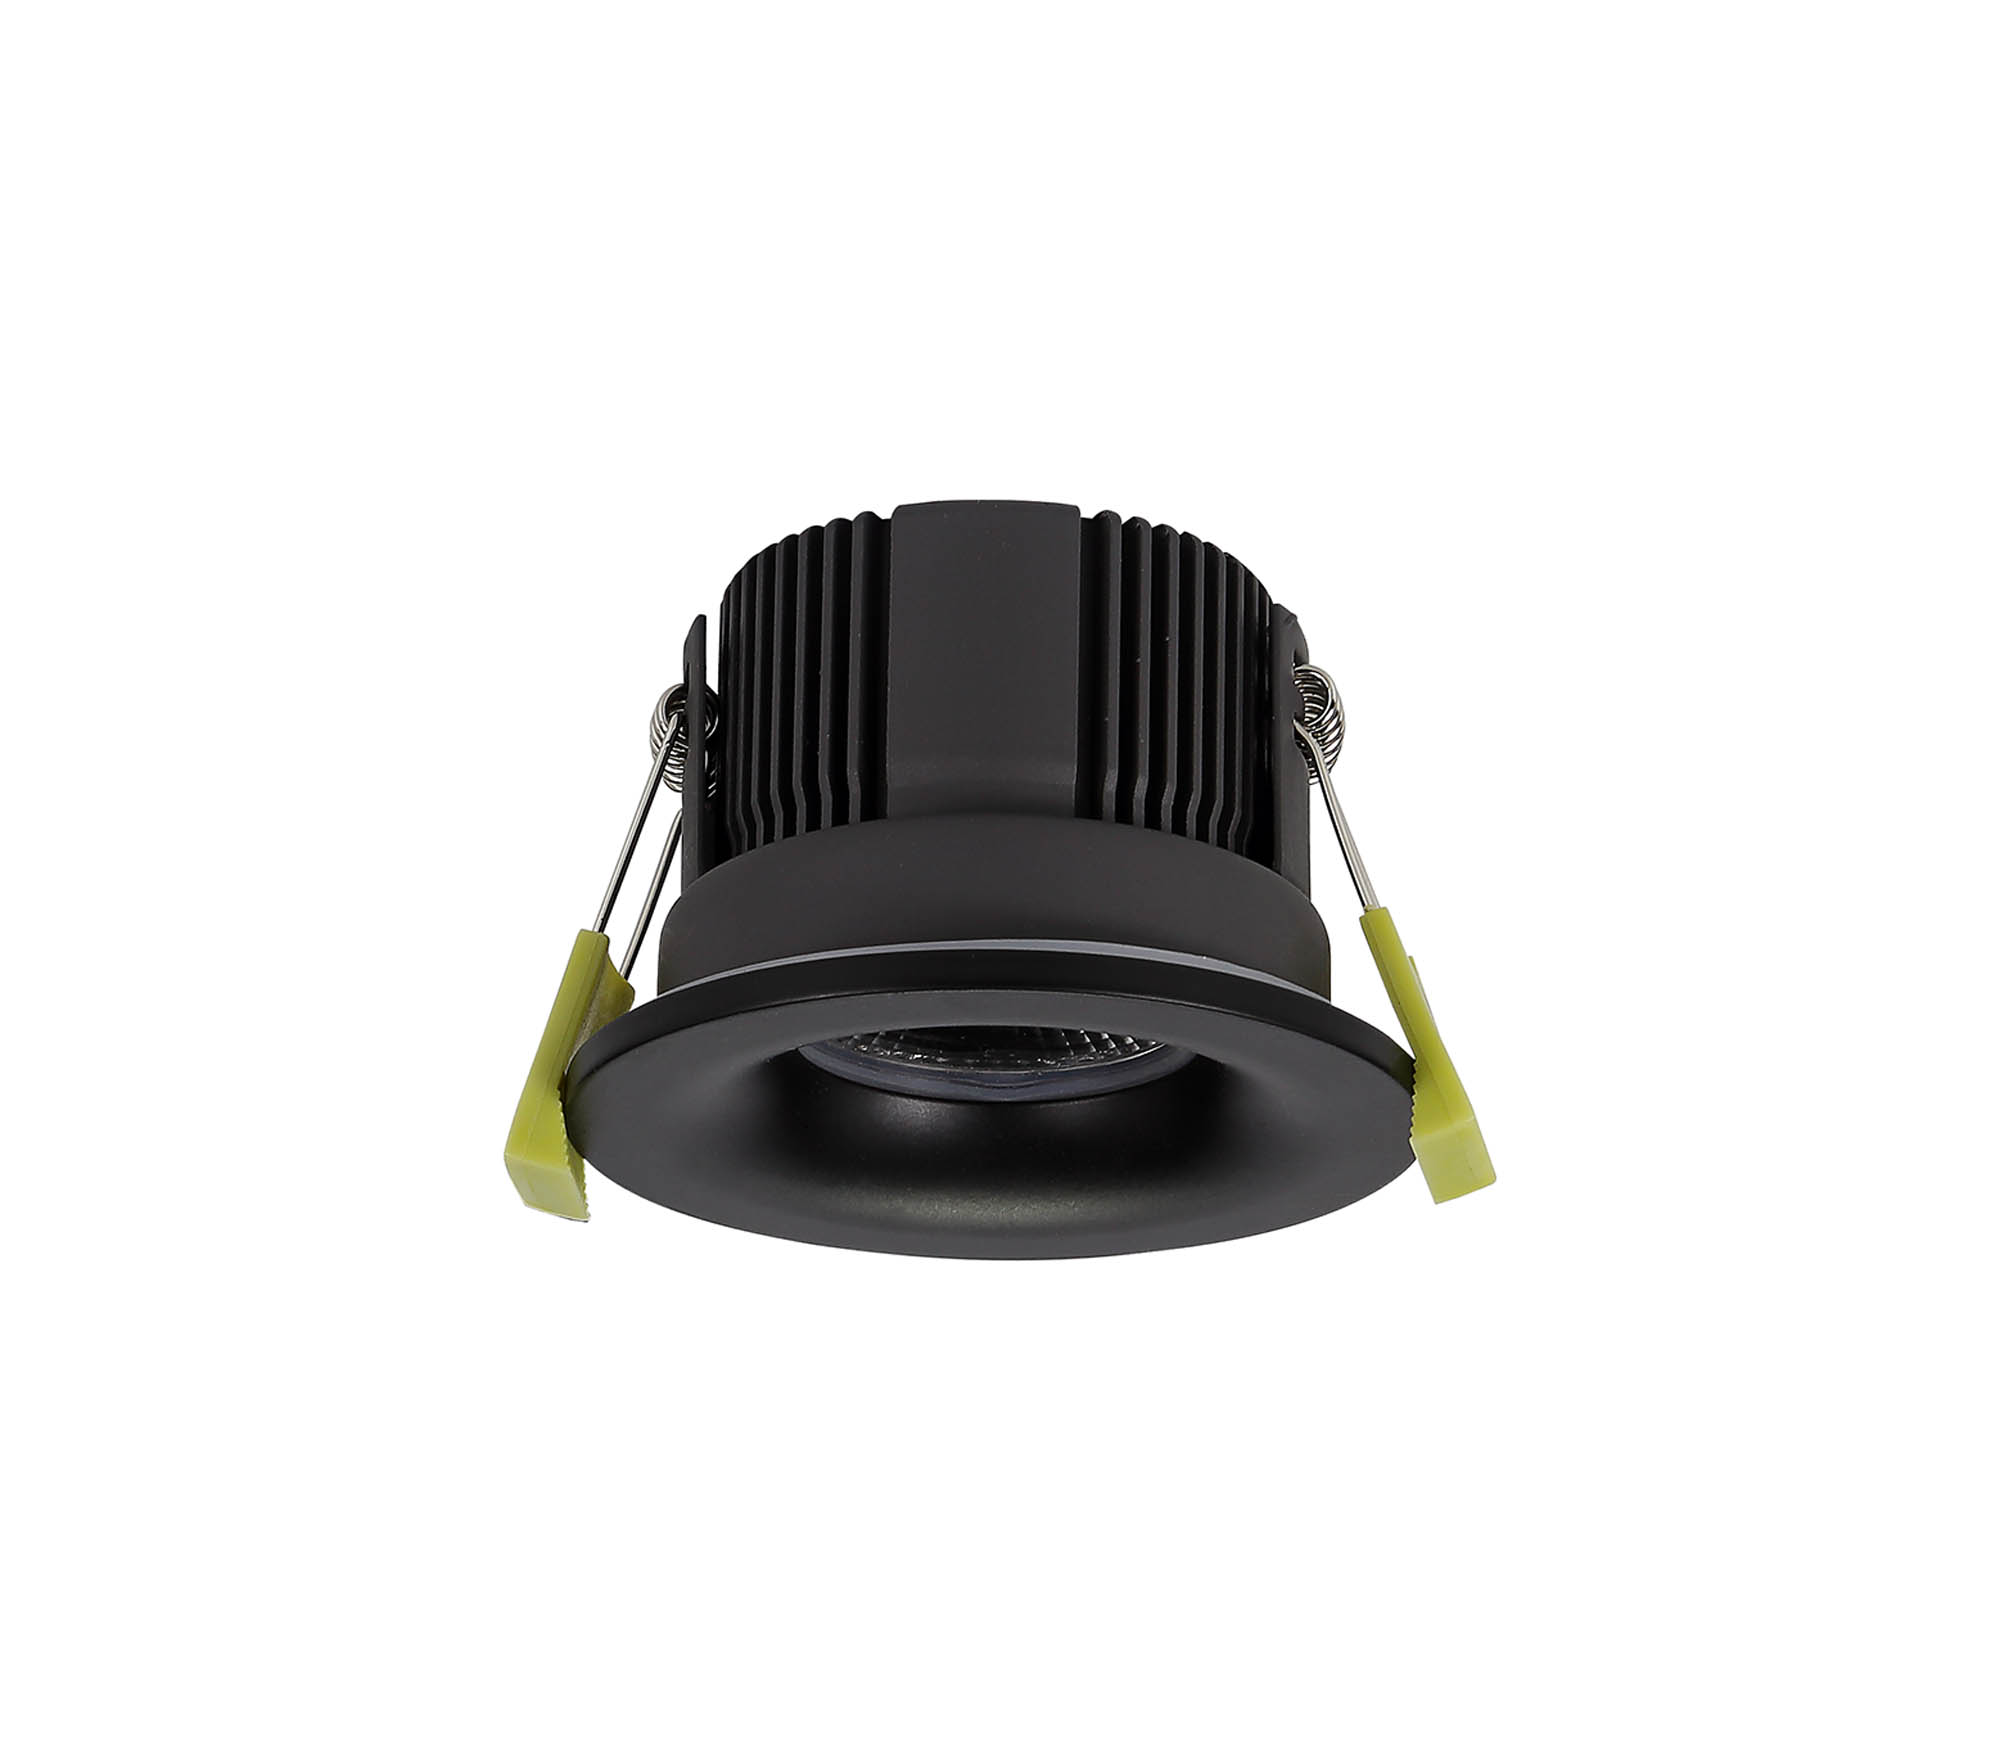 DM200687  Beck 11 FR, 11W, IP65 Matt Black LED Recessed Curved Fire Rated Downlight, Cut Out 68mm, 4000K, PLUG IN DRIVER INCLUDED, 3yrs Warranty